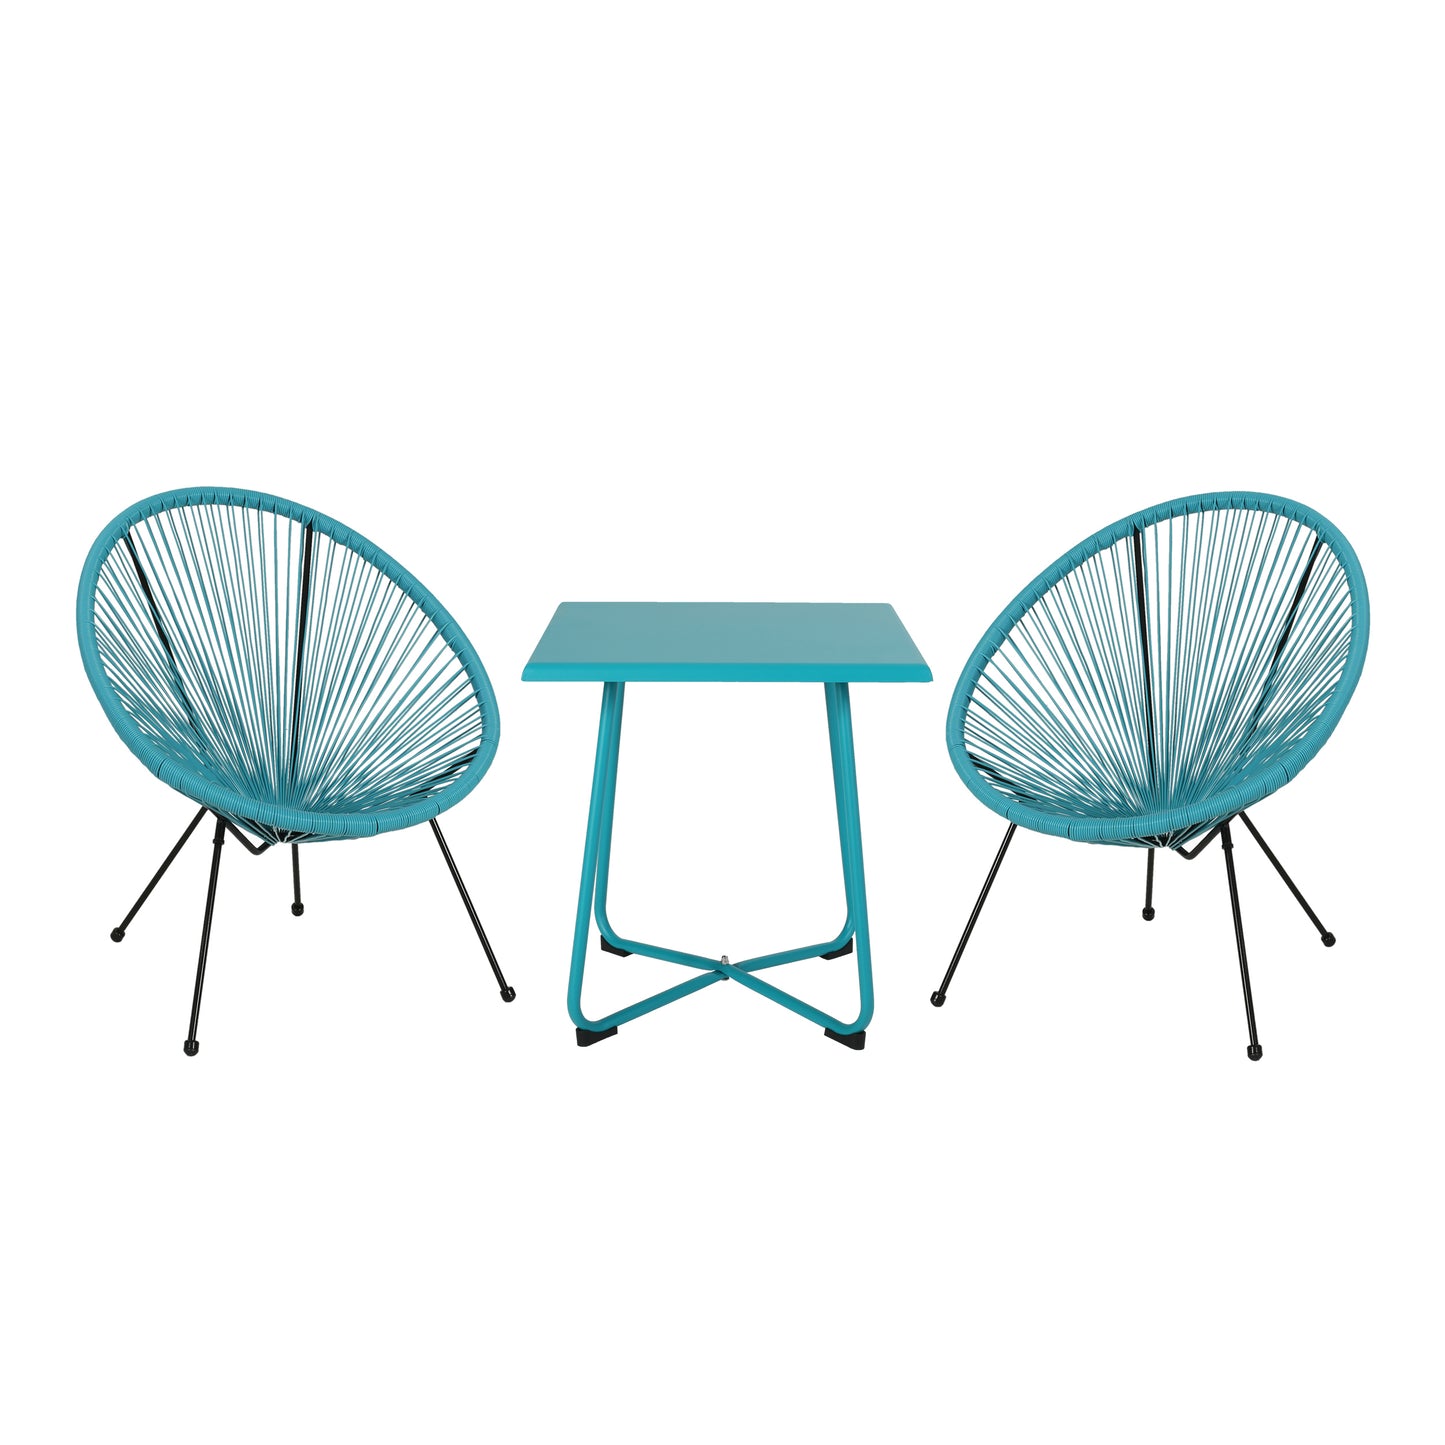 Sale Furniture Alexis Outdoor Woven Chair Teal+Black (Set of 2)